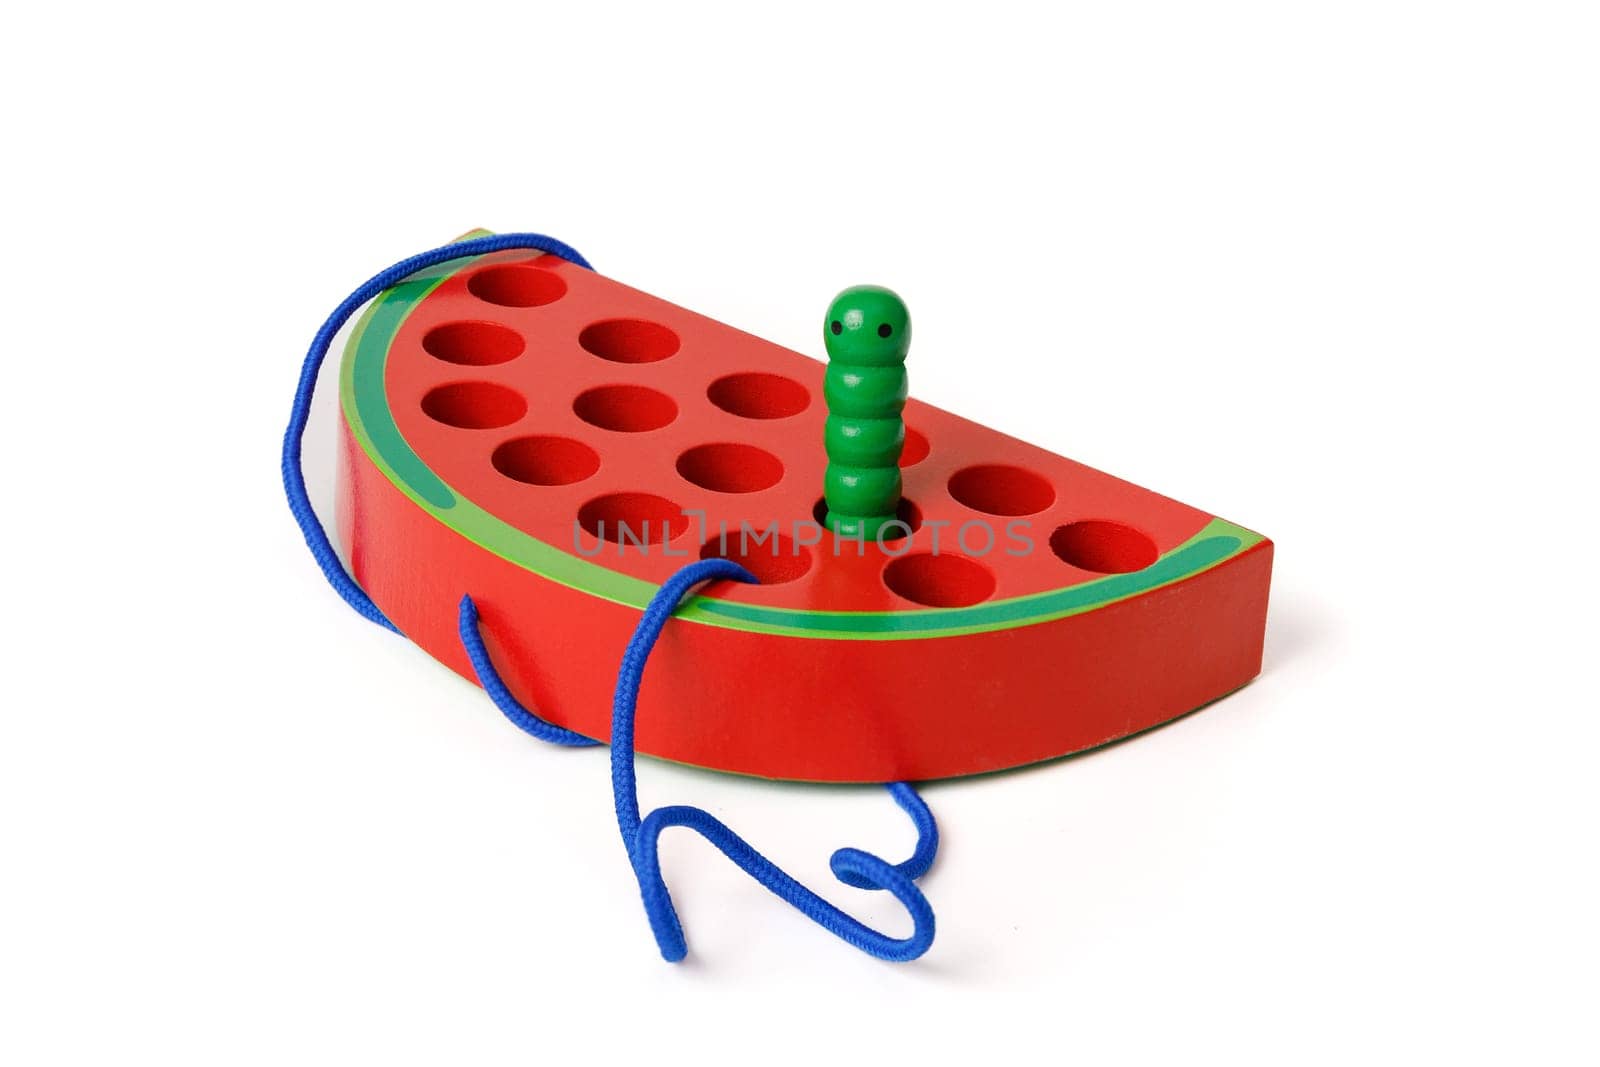 Kid's wooden Montessori toy in the shape of a red watermelon with a funny worm on a rope, toy for fine hand motor skills, isolated on white background